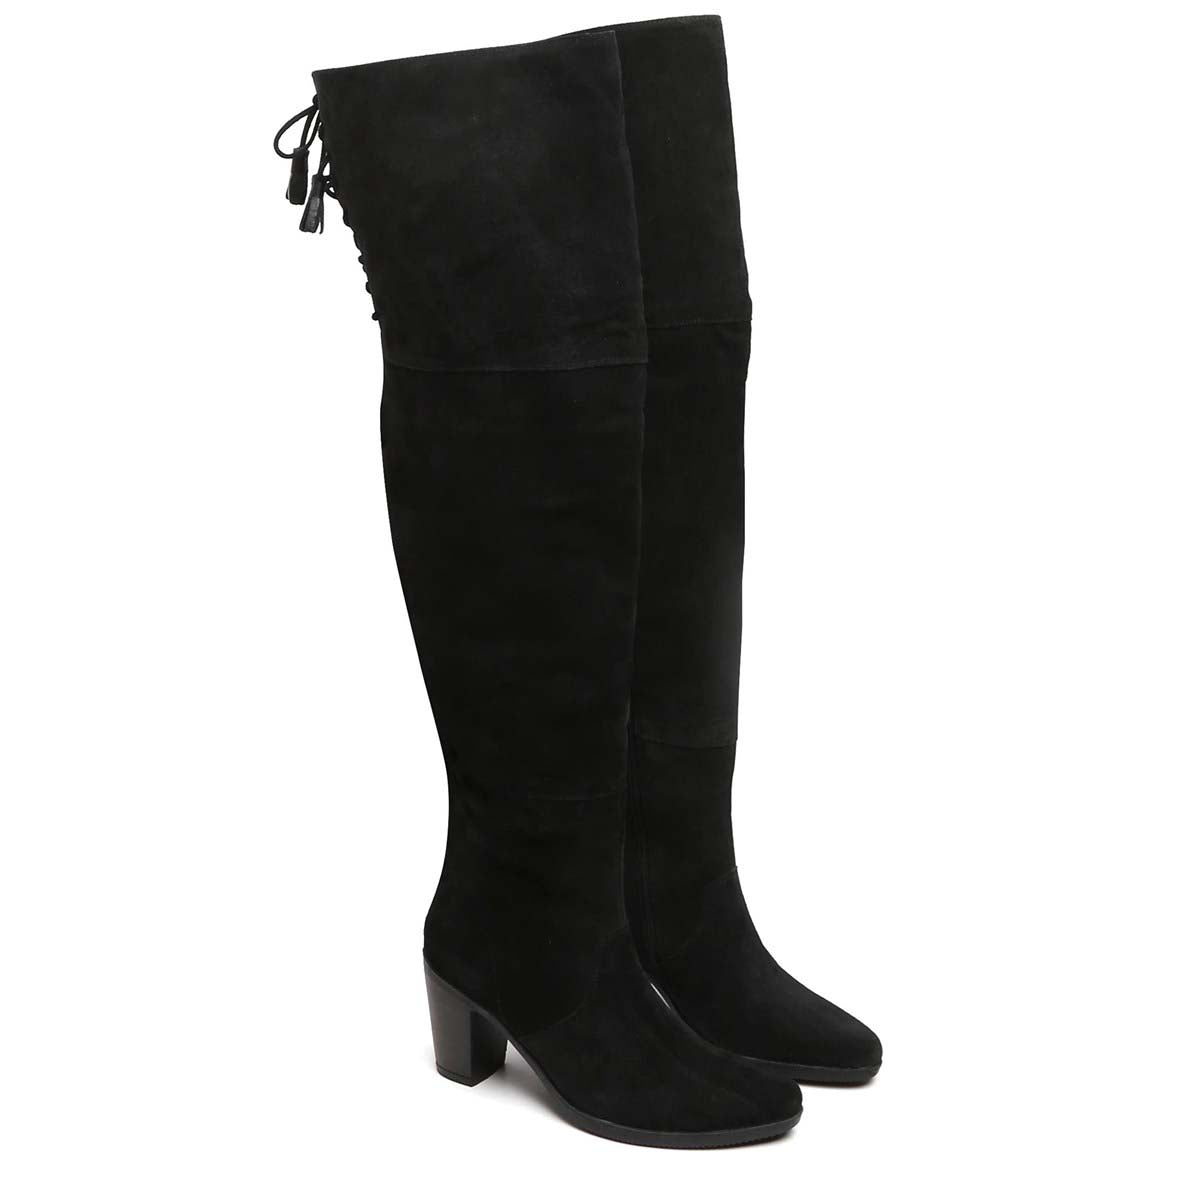 Black Suede Leather Top Lace Knee High Ladies Boots By Brune & Bareskin